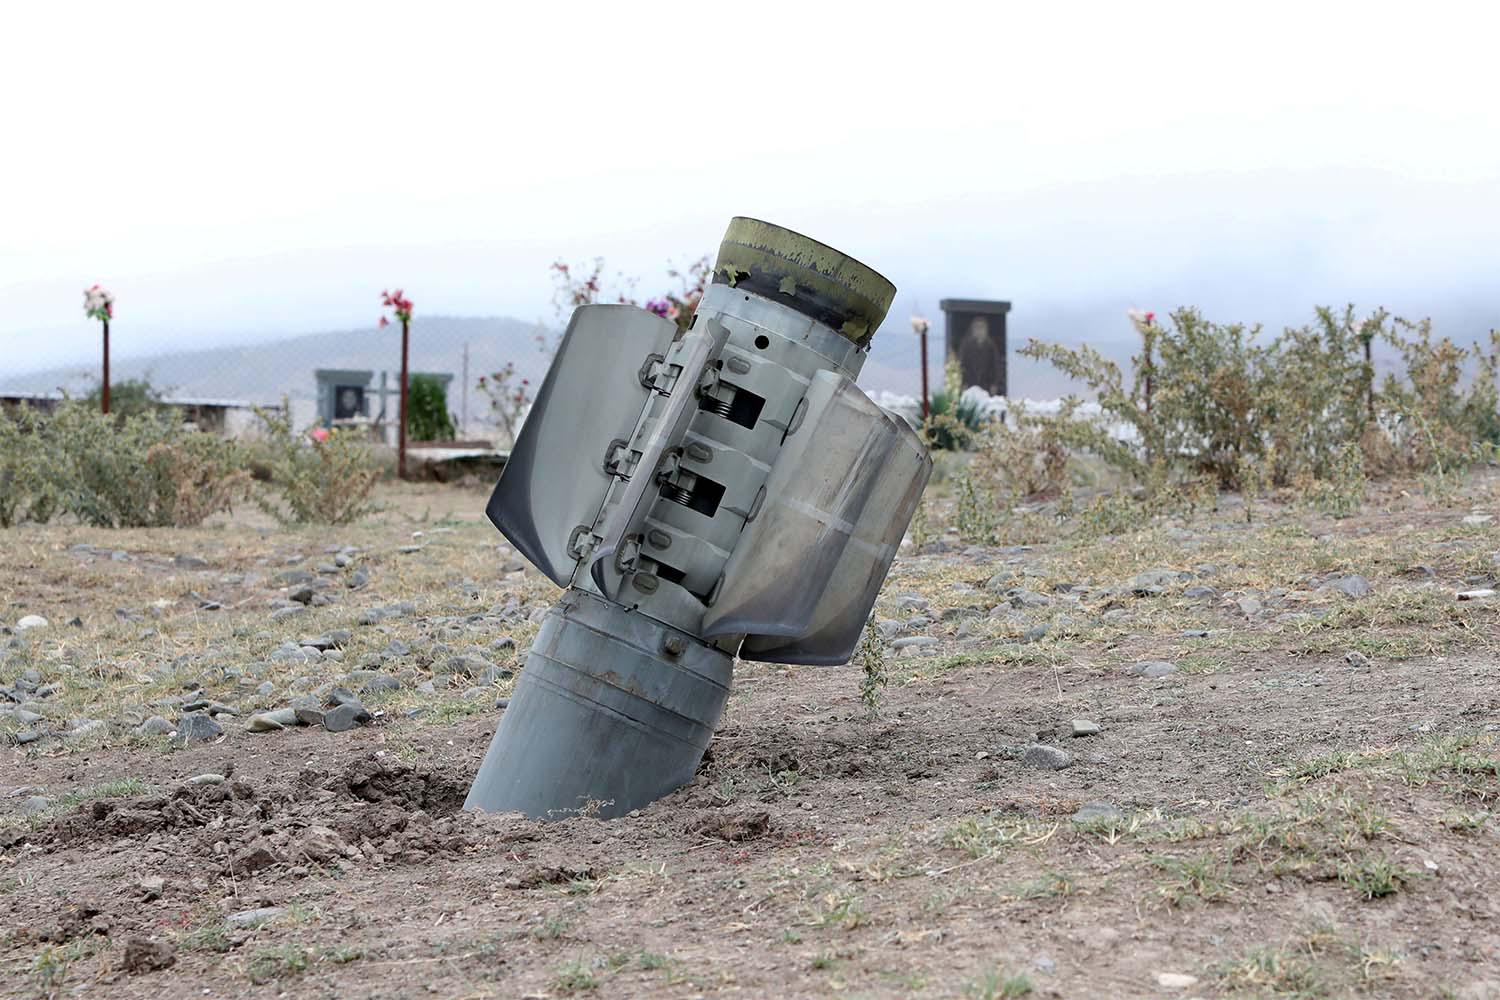 he remains of a rocket shell are seen near a graveyard in the town of Ivanyan (Khojaly) in the breakaway region of Nagorno-Karabakh